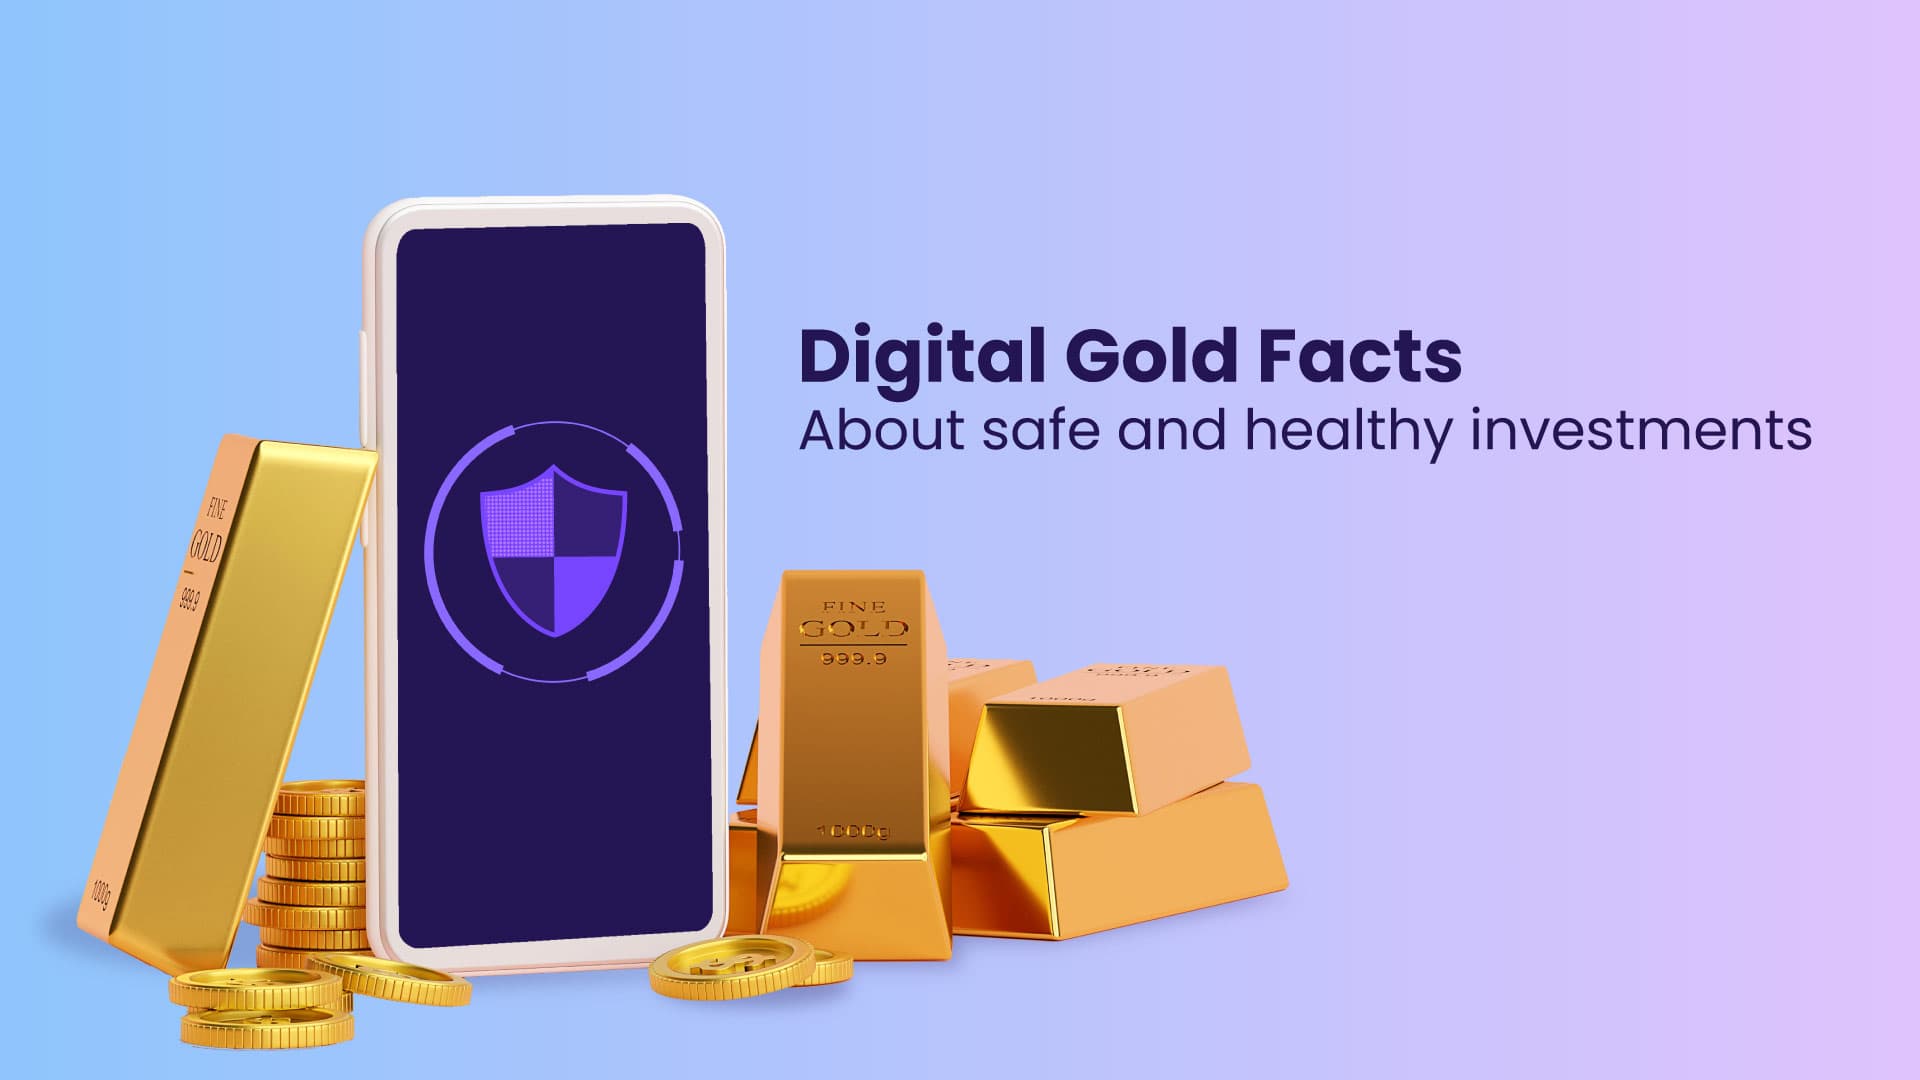 Digital Gold: How to Invest - Investment Options for Safe and Secure Investments